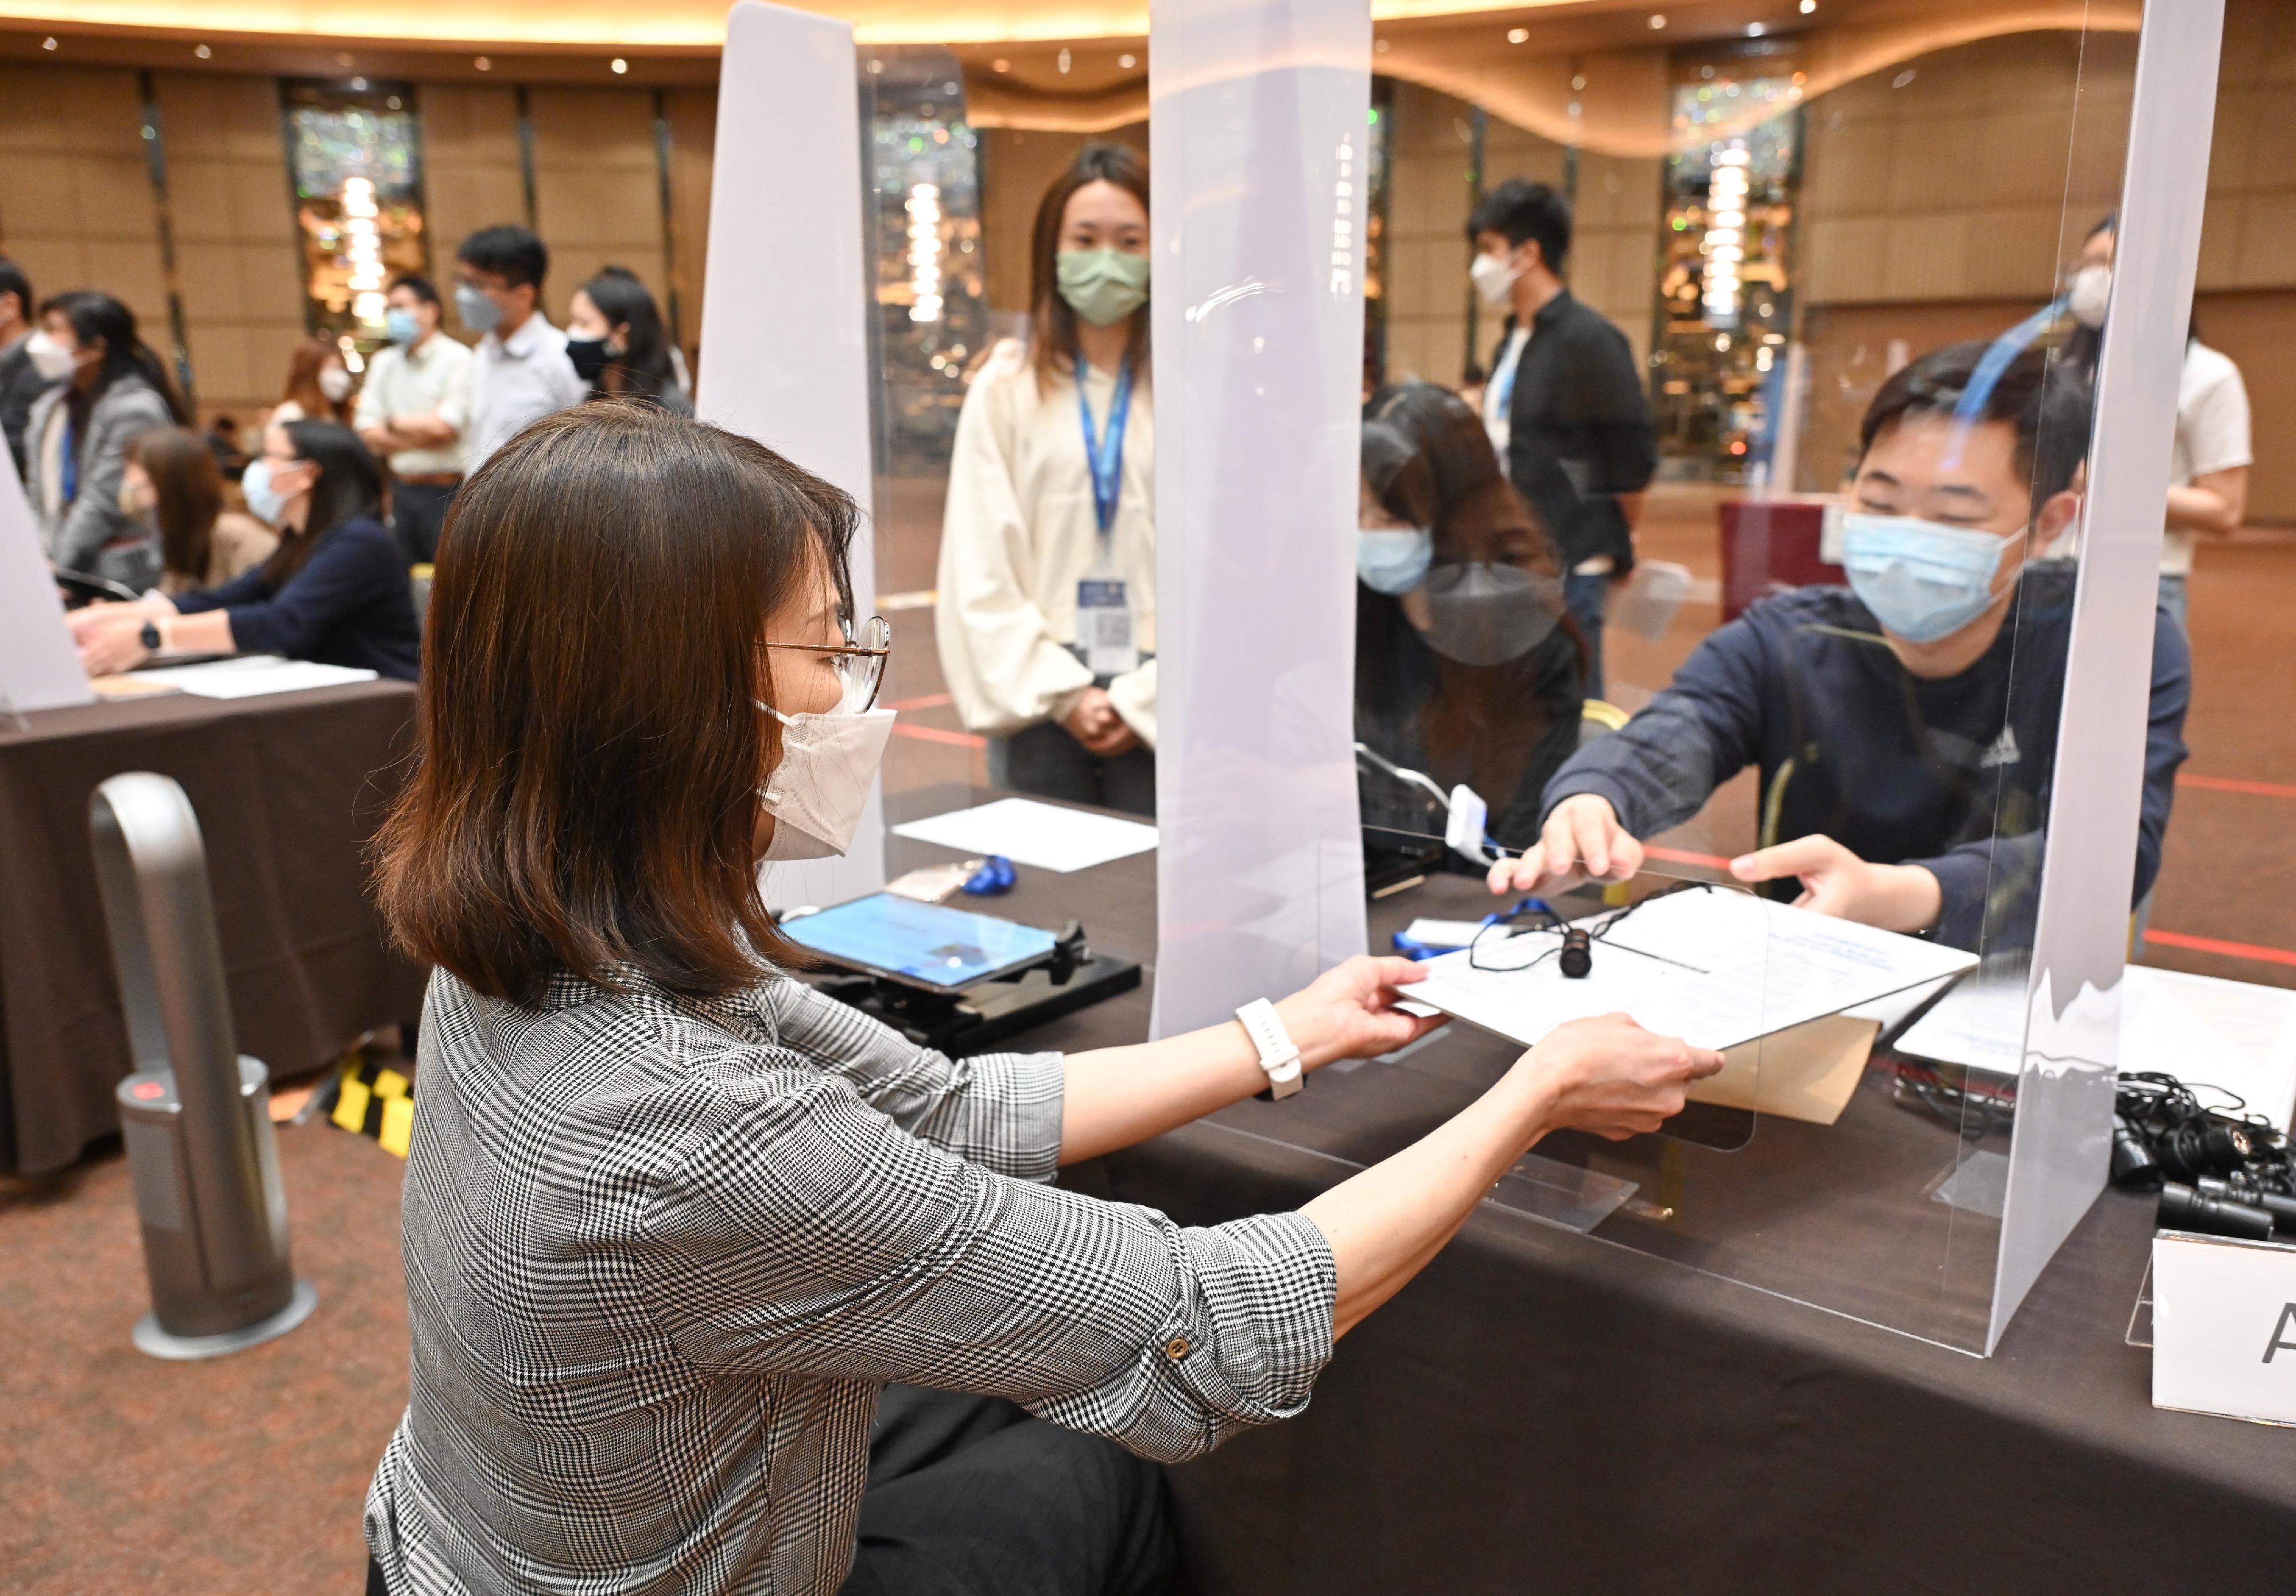 The 2022 Chief Executive Election will be held on May 8. The Registration and Electoral Office arranged, over the past few days, online and hands-on training sessions for electoral staff who will work in the main polling station and the central counting station. Photo shows polling staff in a simulation of issuing a ballot paper.